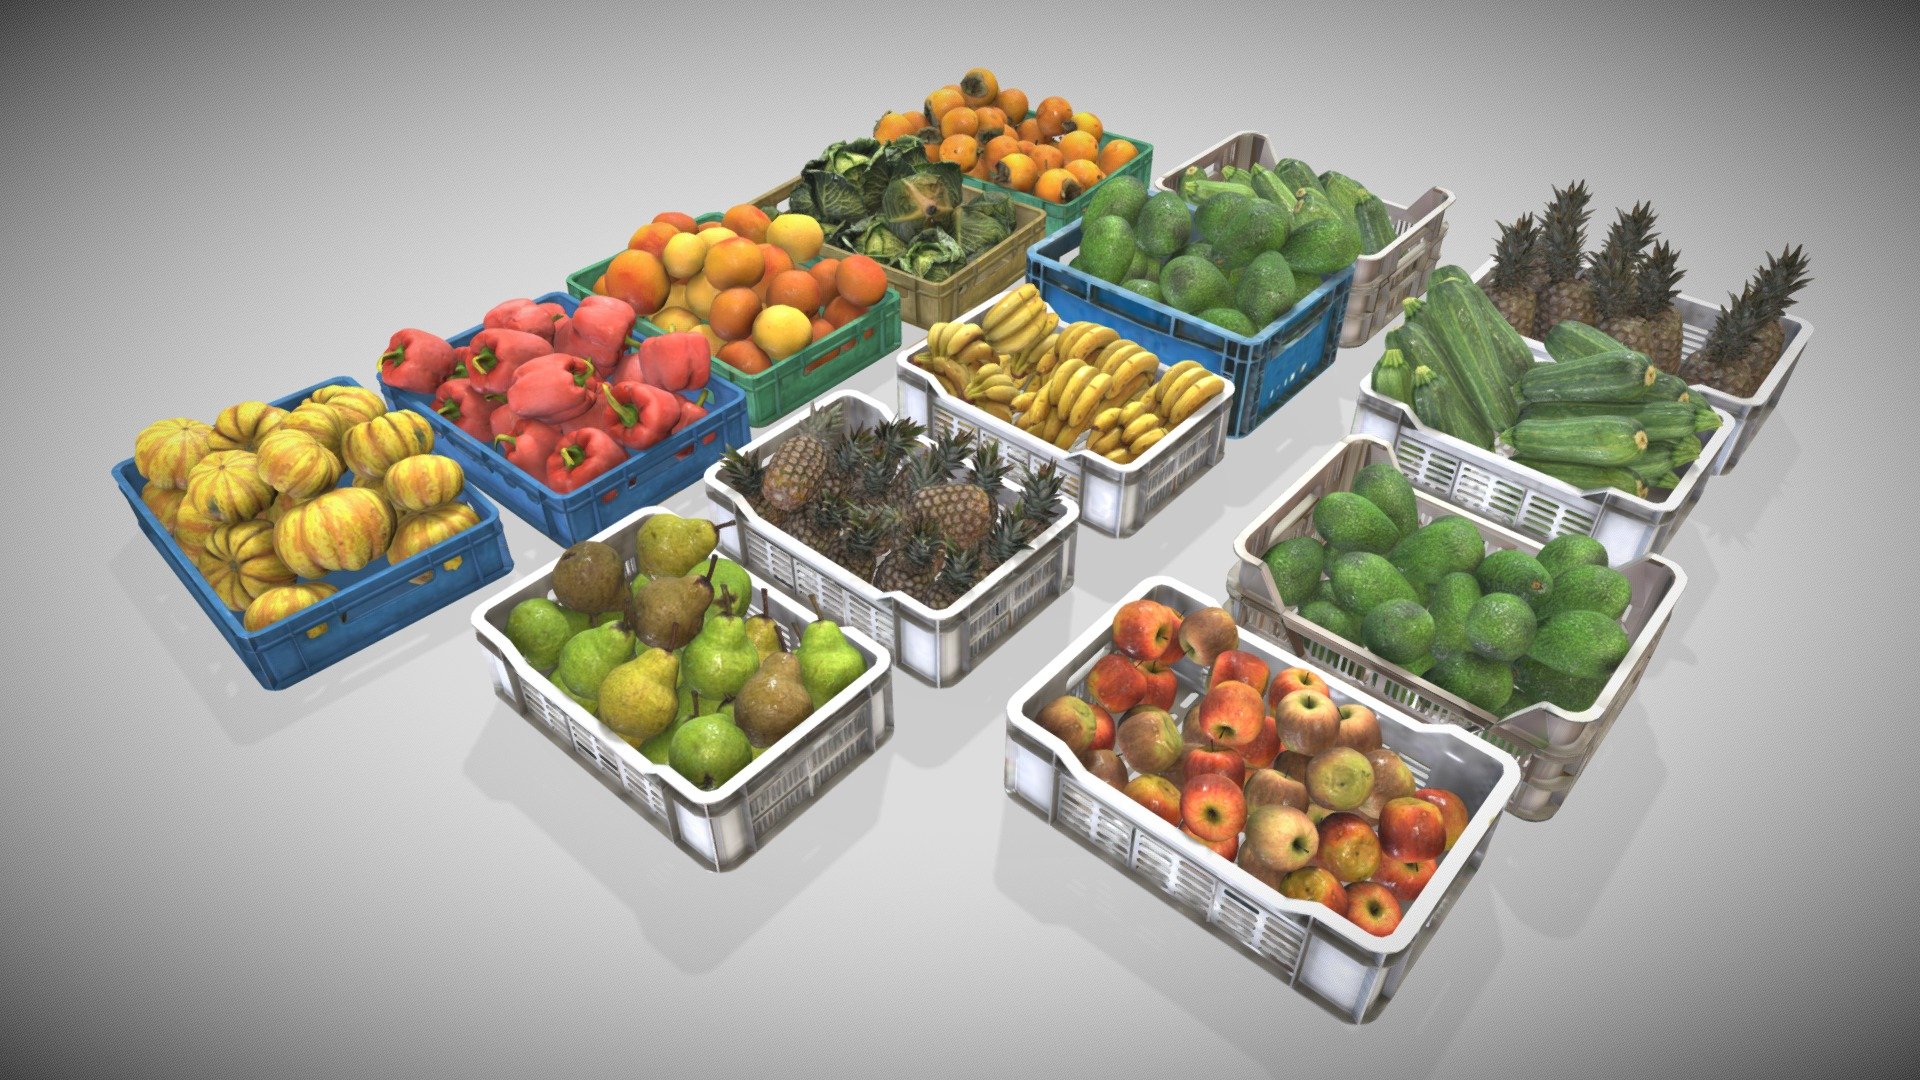 2 Material PBR Metalness 4k (png)

Indipendent Box with pivot center zero position - Fruit and Veg Market Boxes - Buy Royalty Free 3D model by Francesco Coldesina (@topfrank2013) 3d model